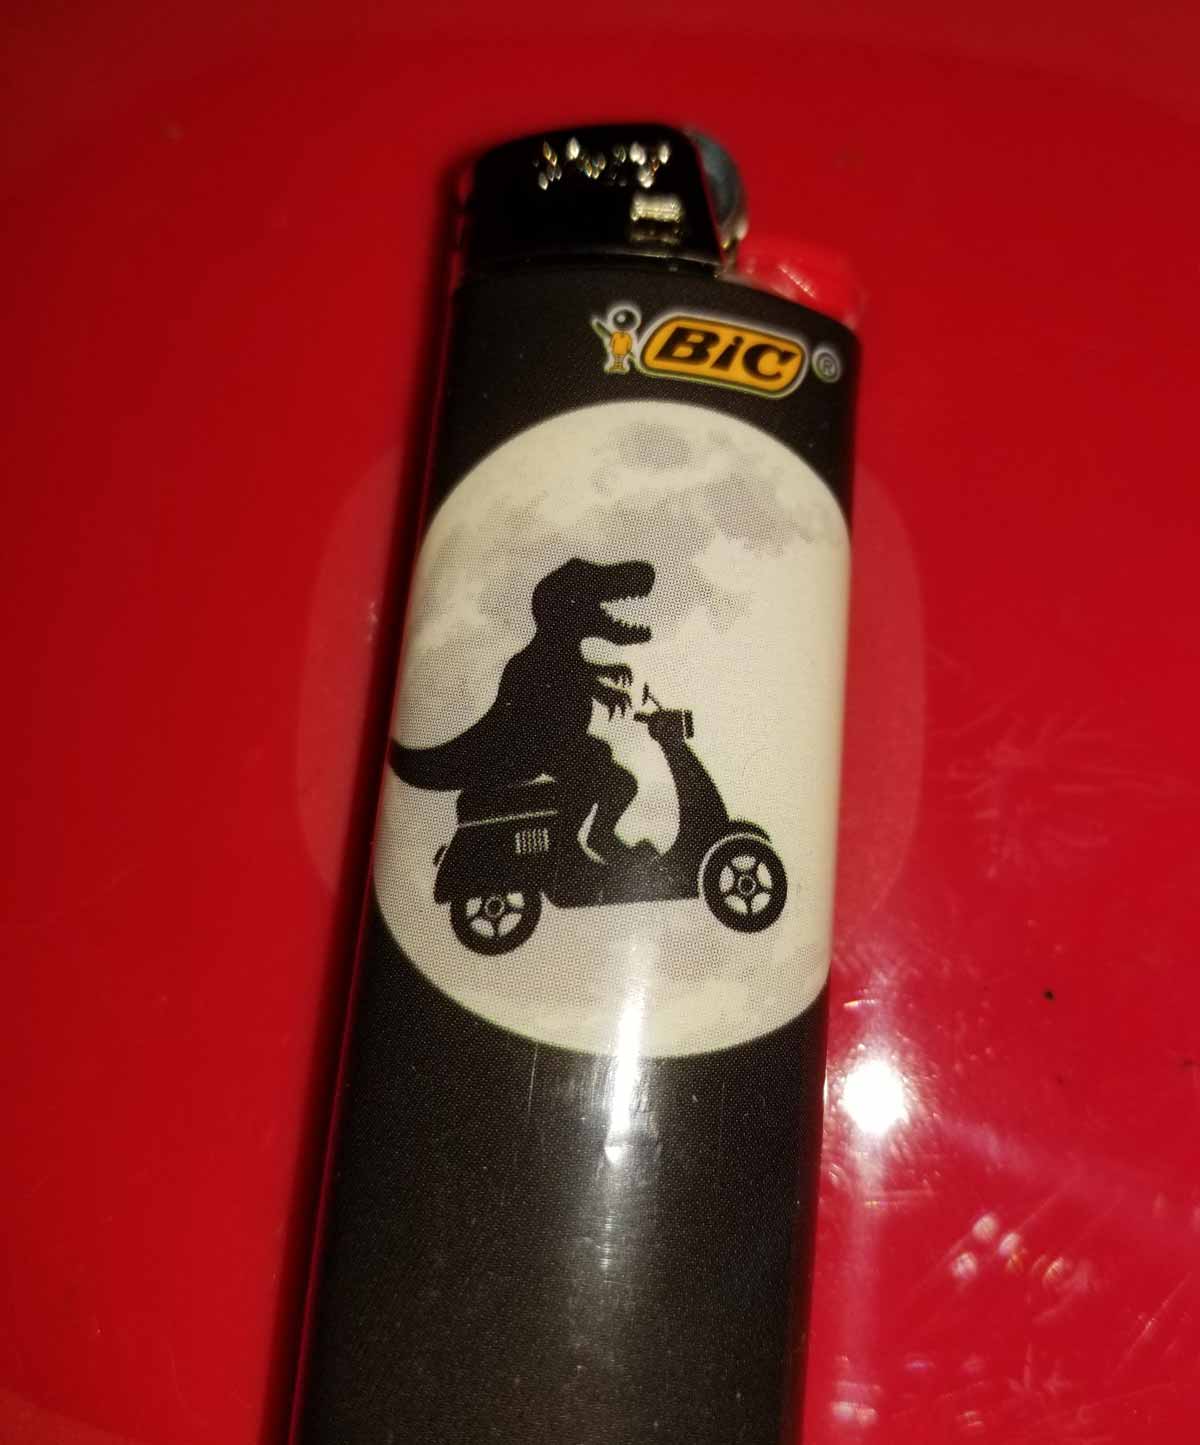 Clerk rang up a random lighter. All I could think was, "Wheeeee!"